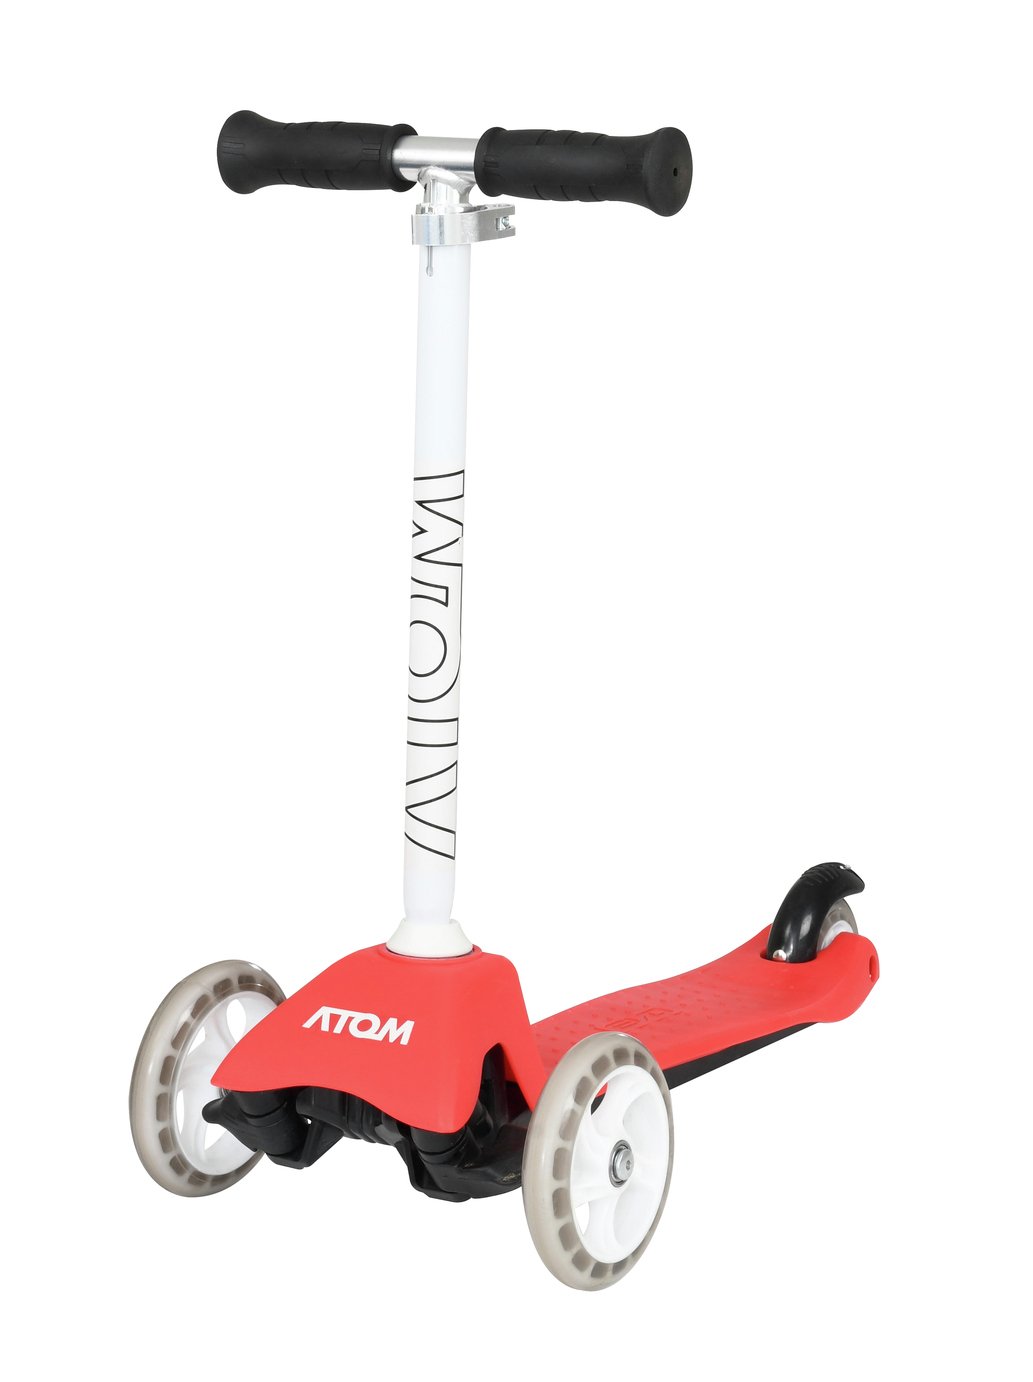 Atom 3 in 1 Explorer Scooter Review